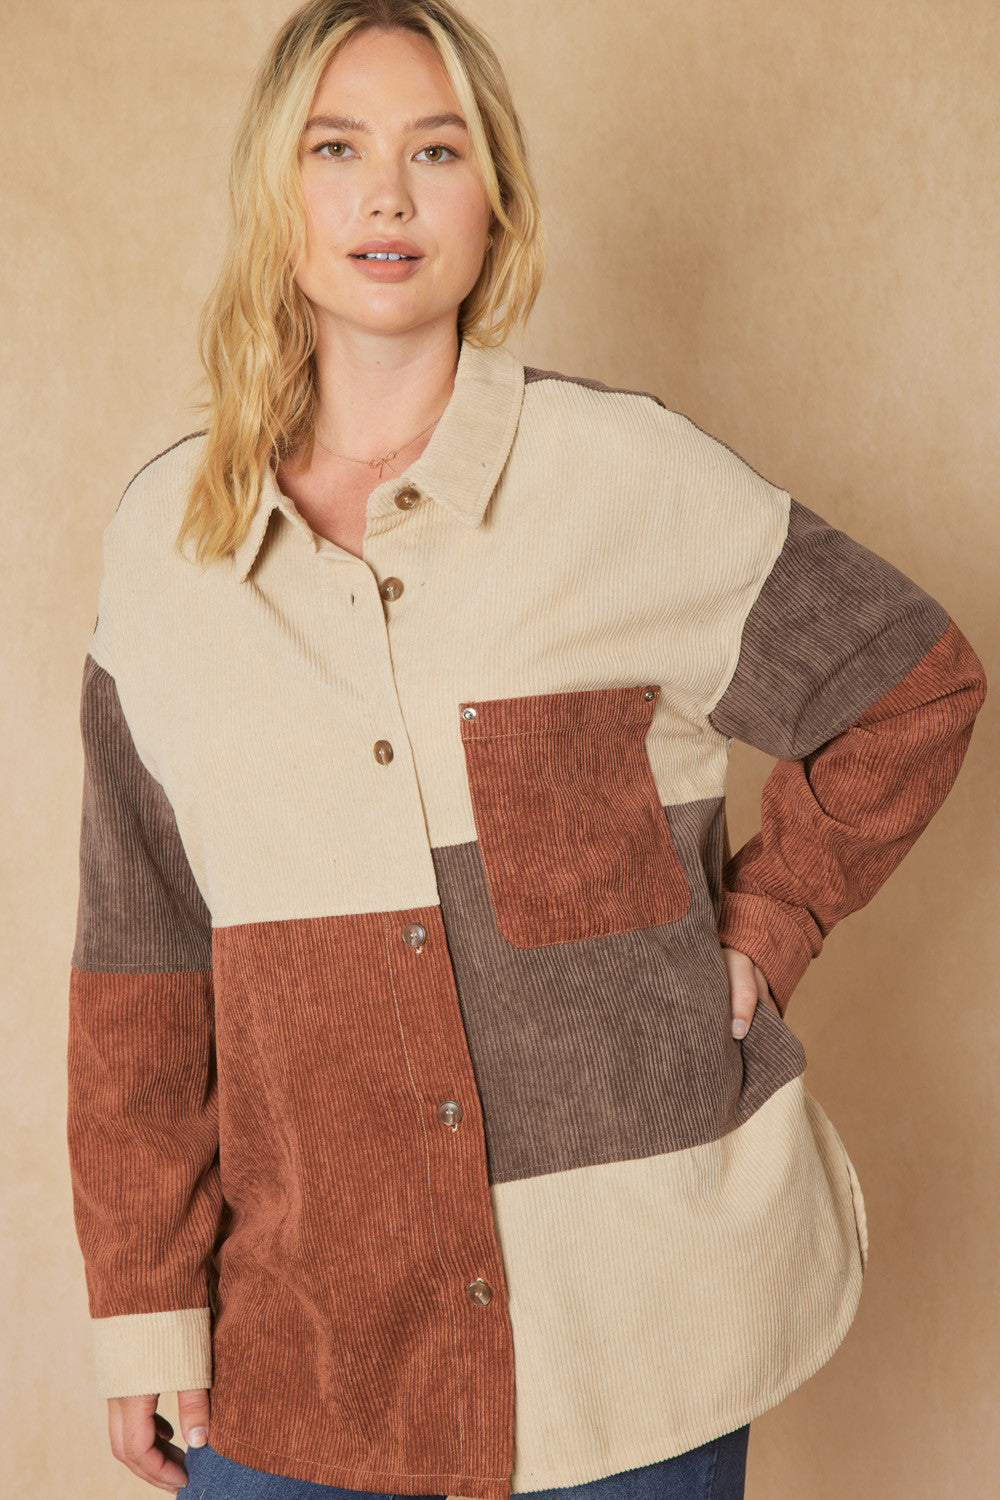 Colorblock Corduroy Button Up Shacket in Plus Size by Entro